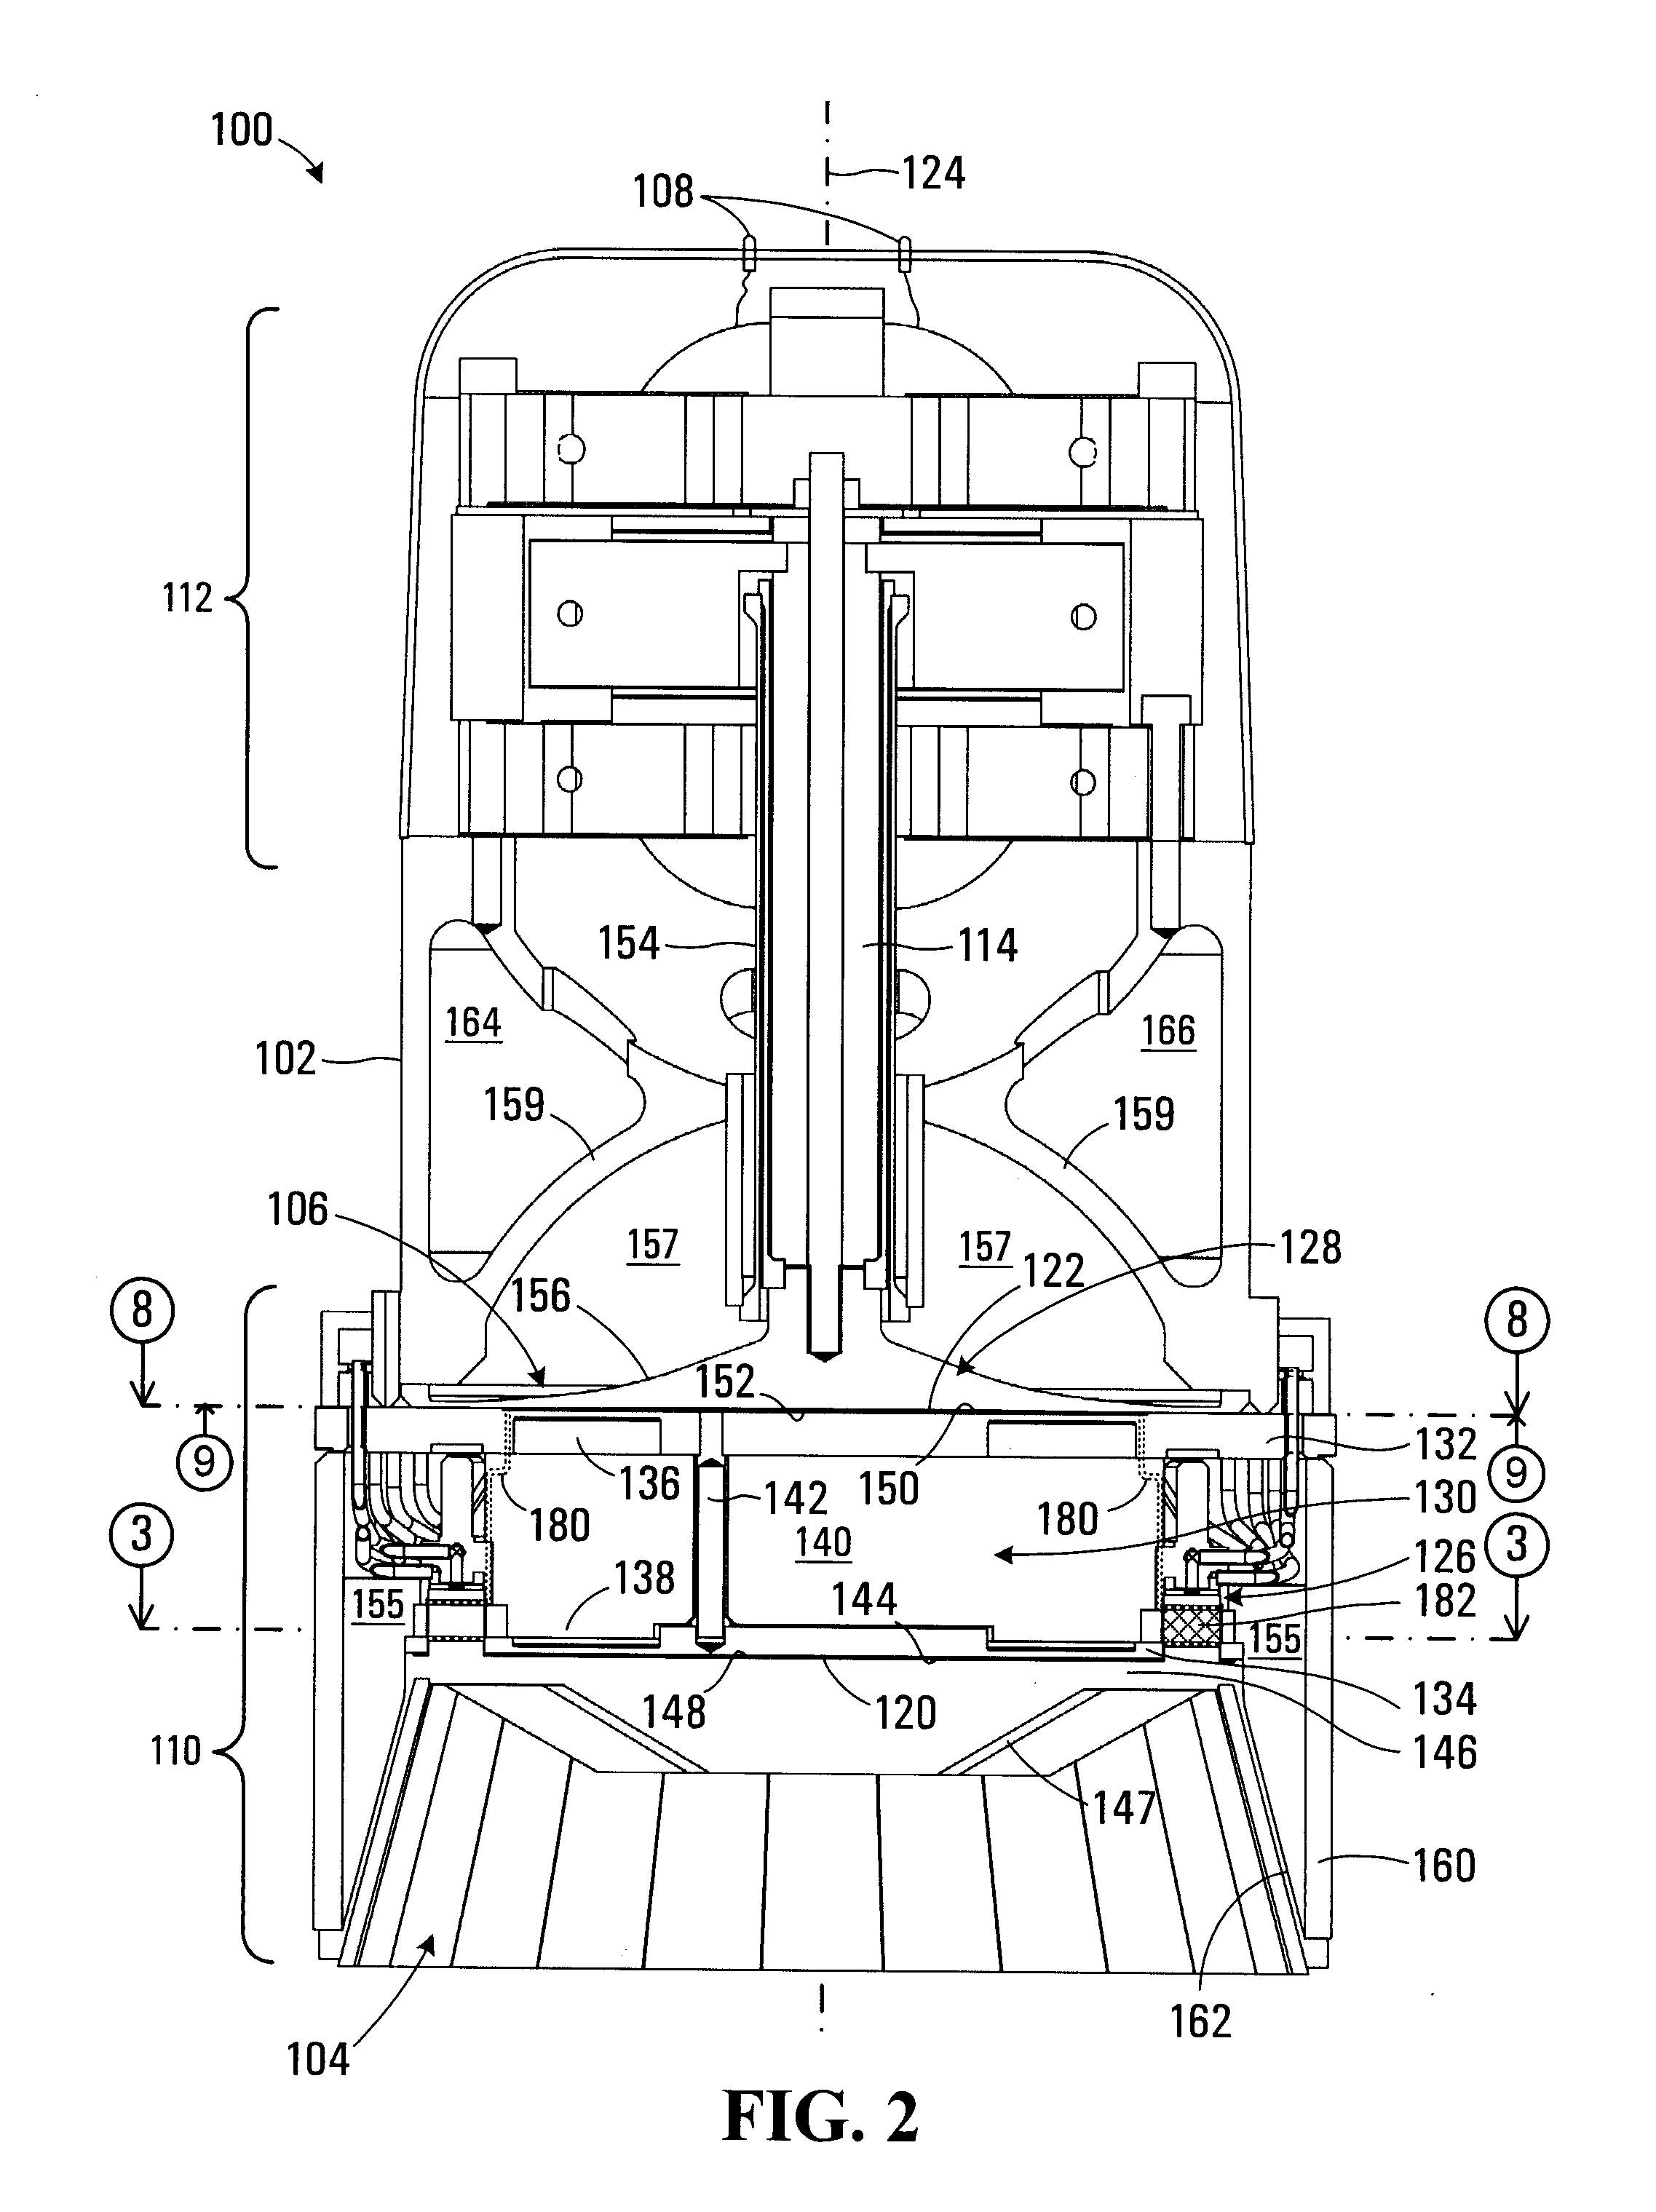 Stirling cycle transducer apparatus